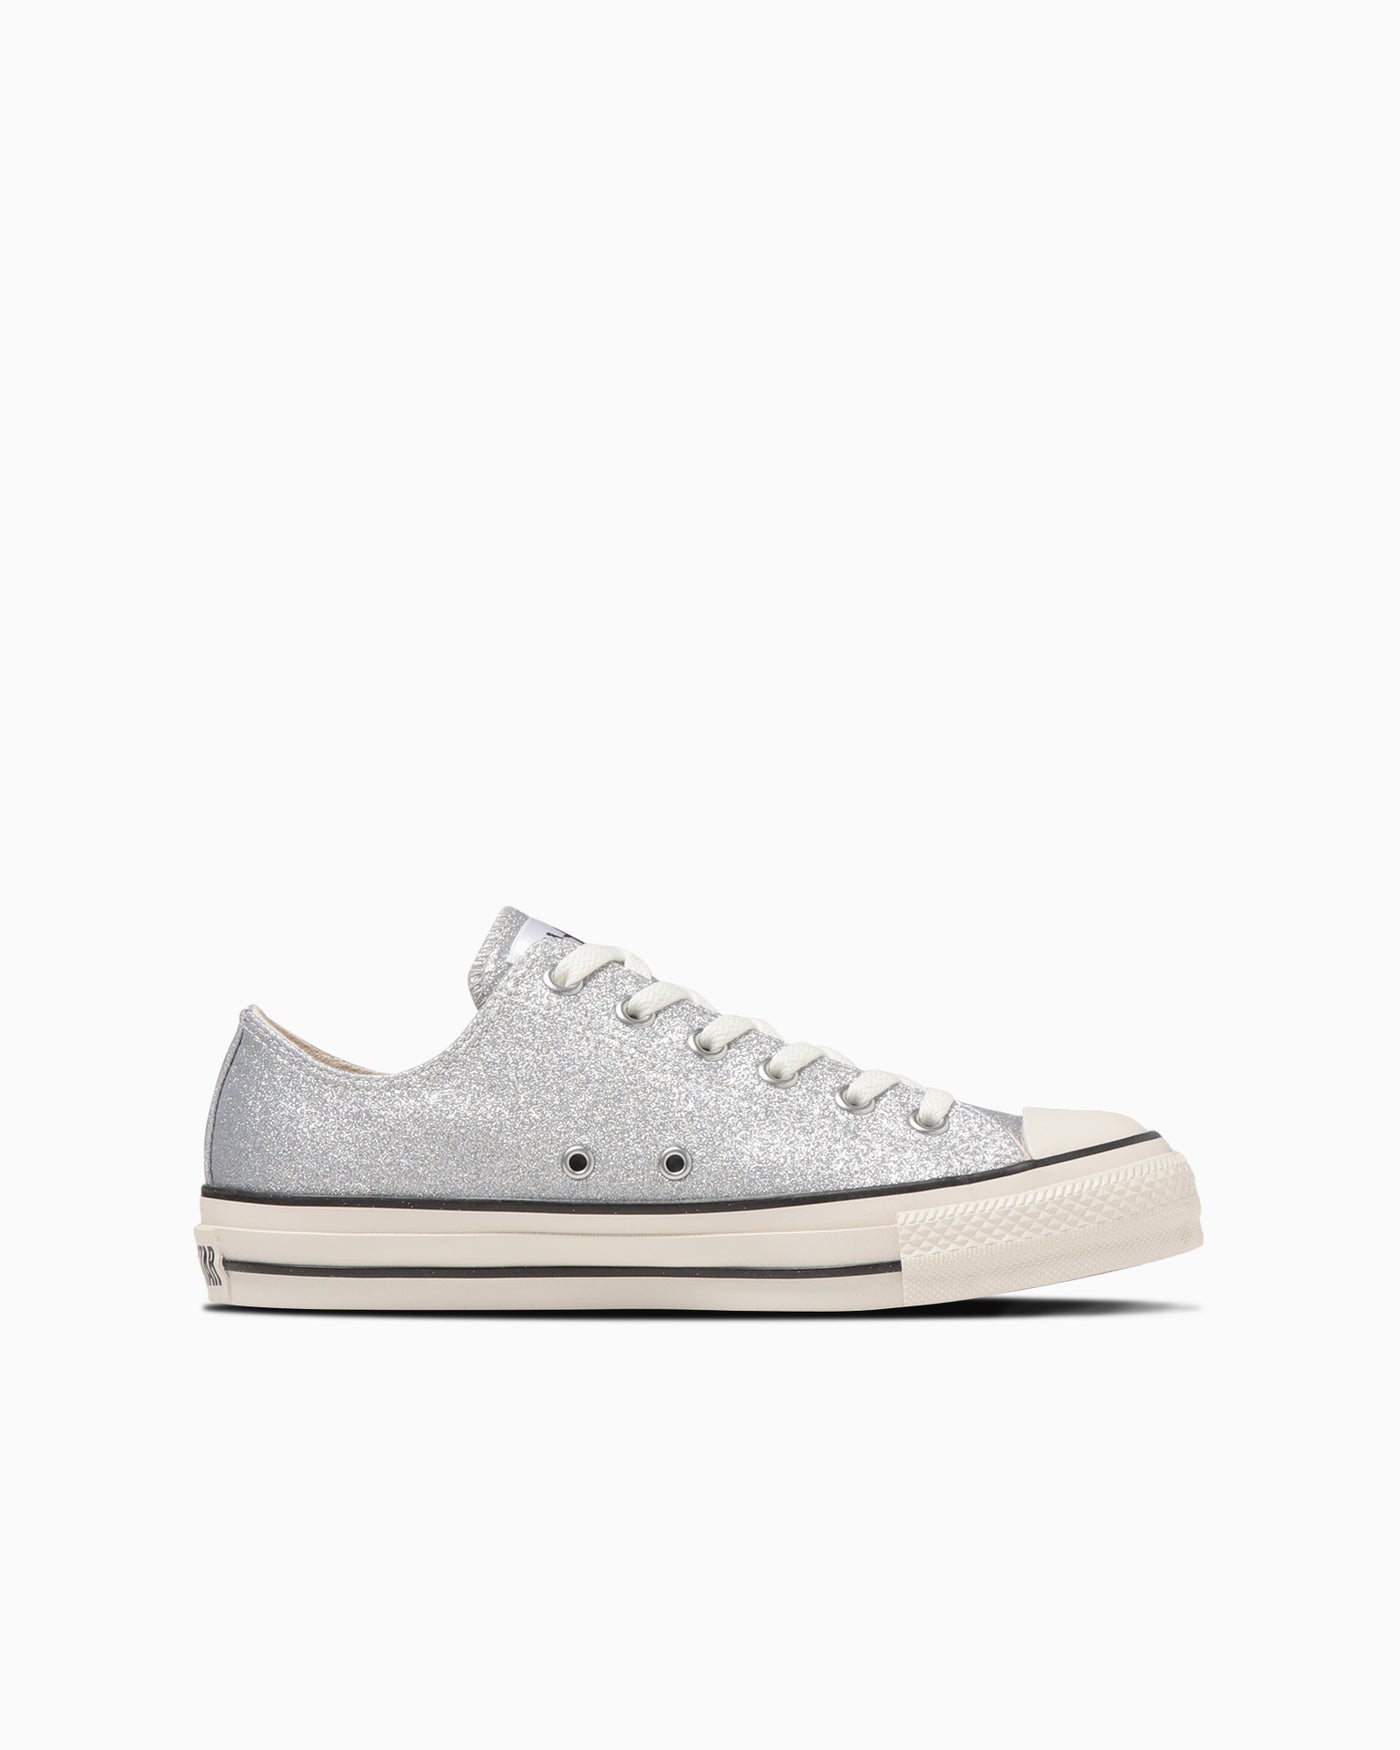 CONVERSE ALL STAR QUILTED OX SILVER 25.5